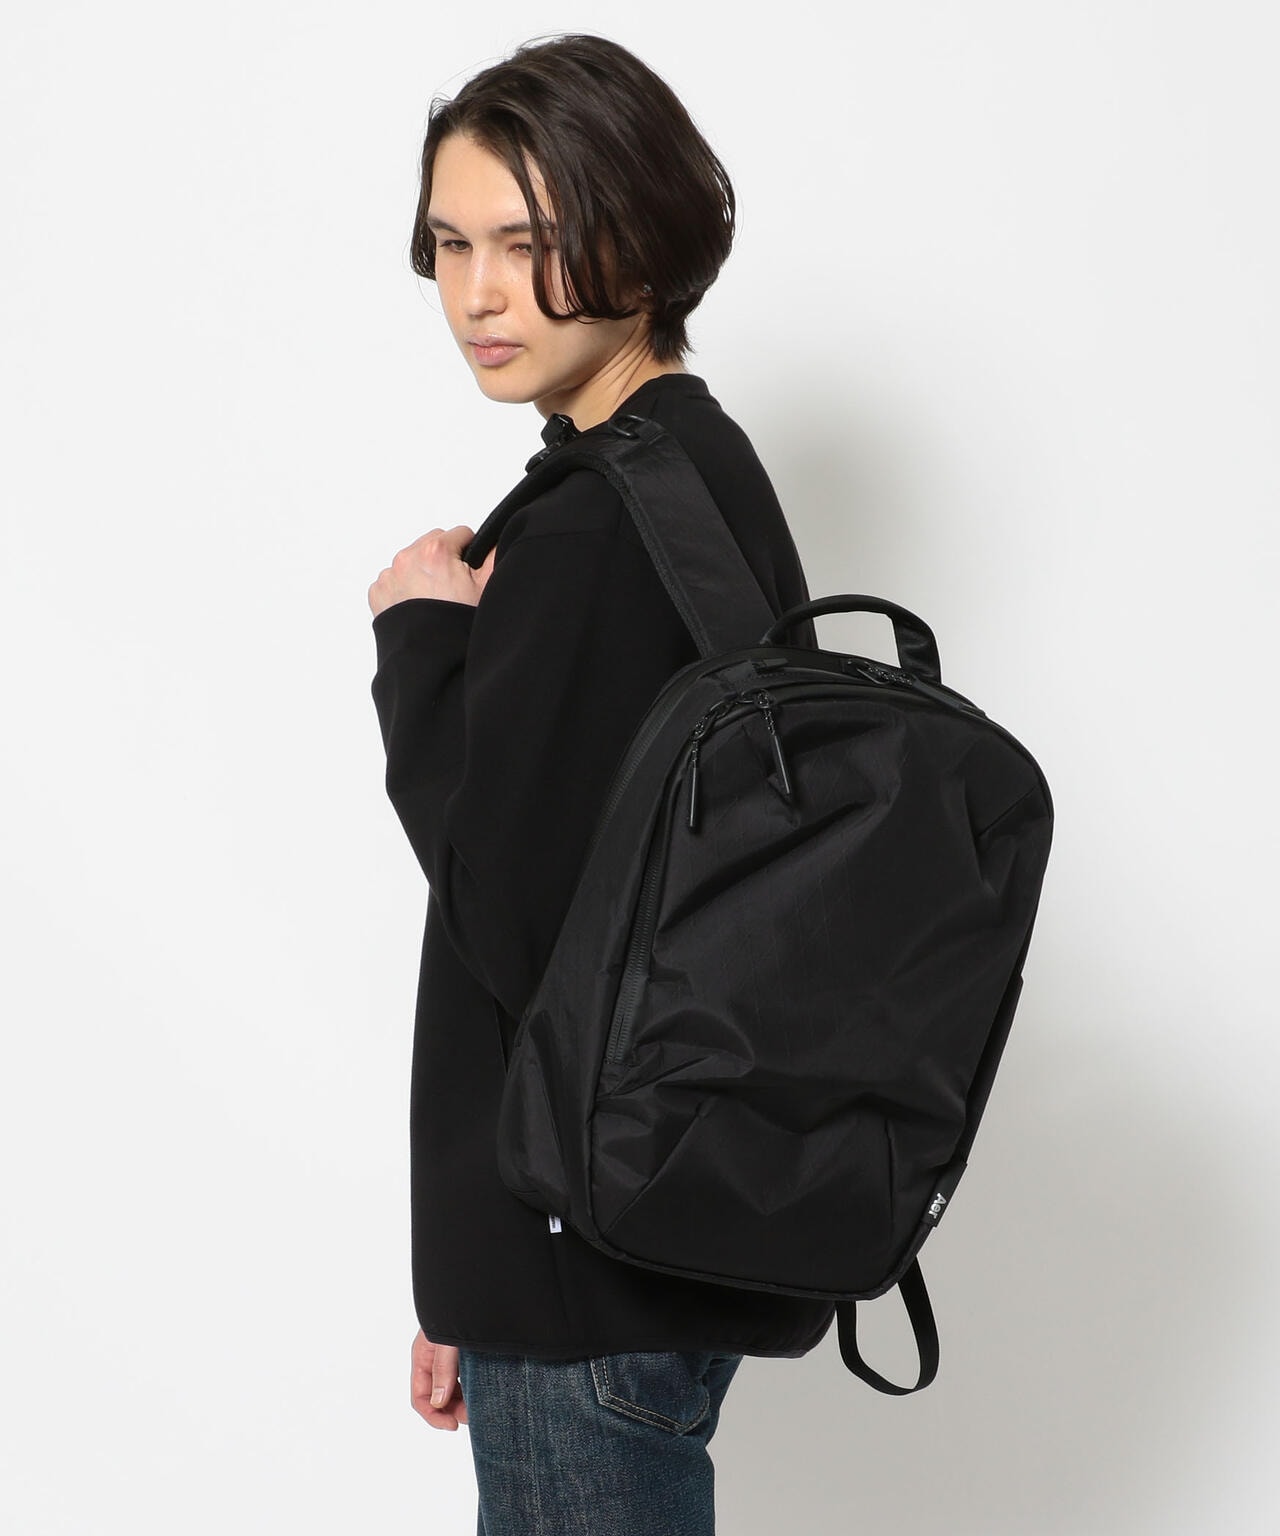 Aer（エアー）Day Pack2 X-PAC